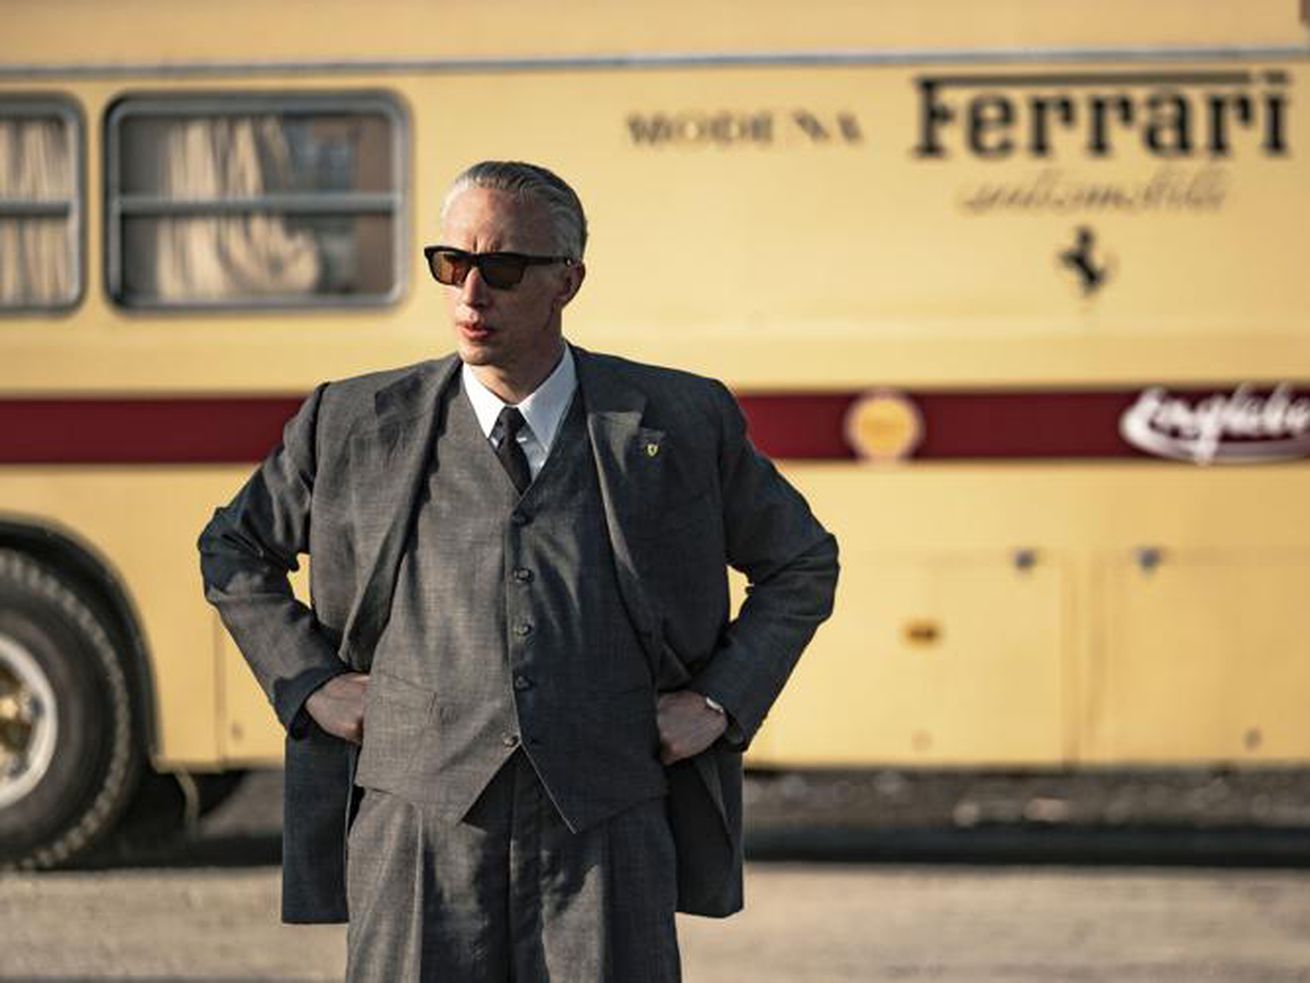 A man with white hair and sunglasses in a natty suit in front of a trailer that says “Ferrari” on the side